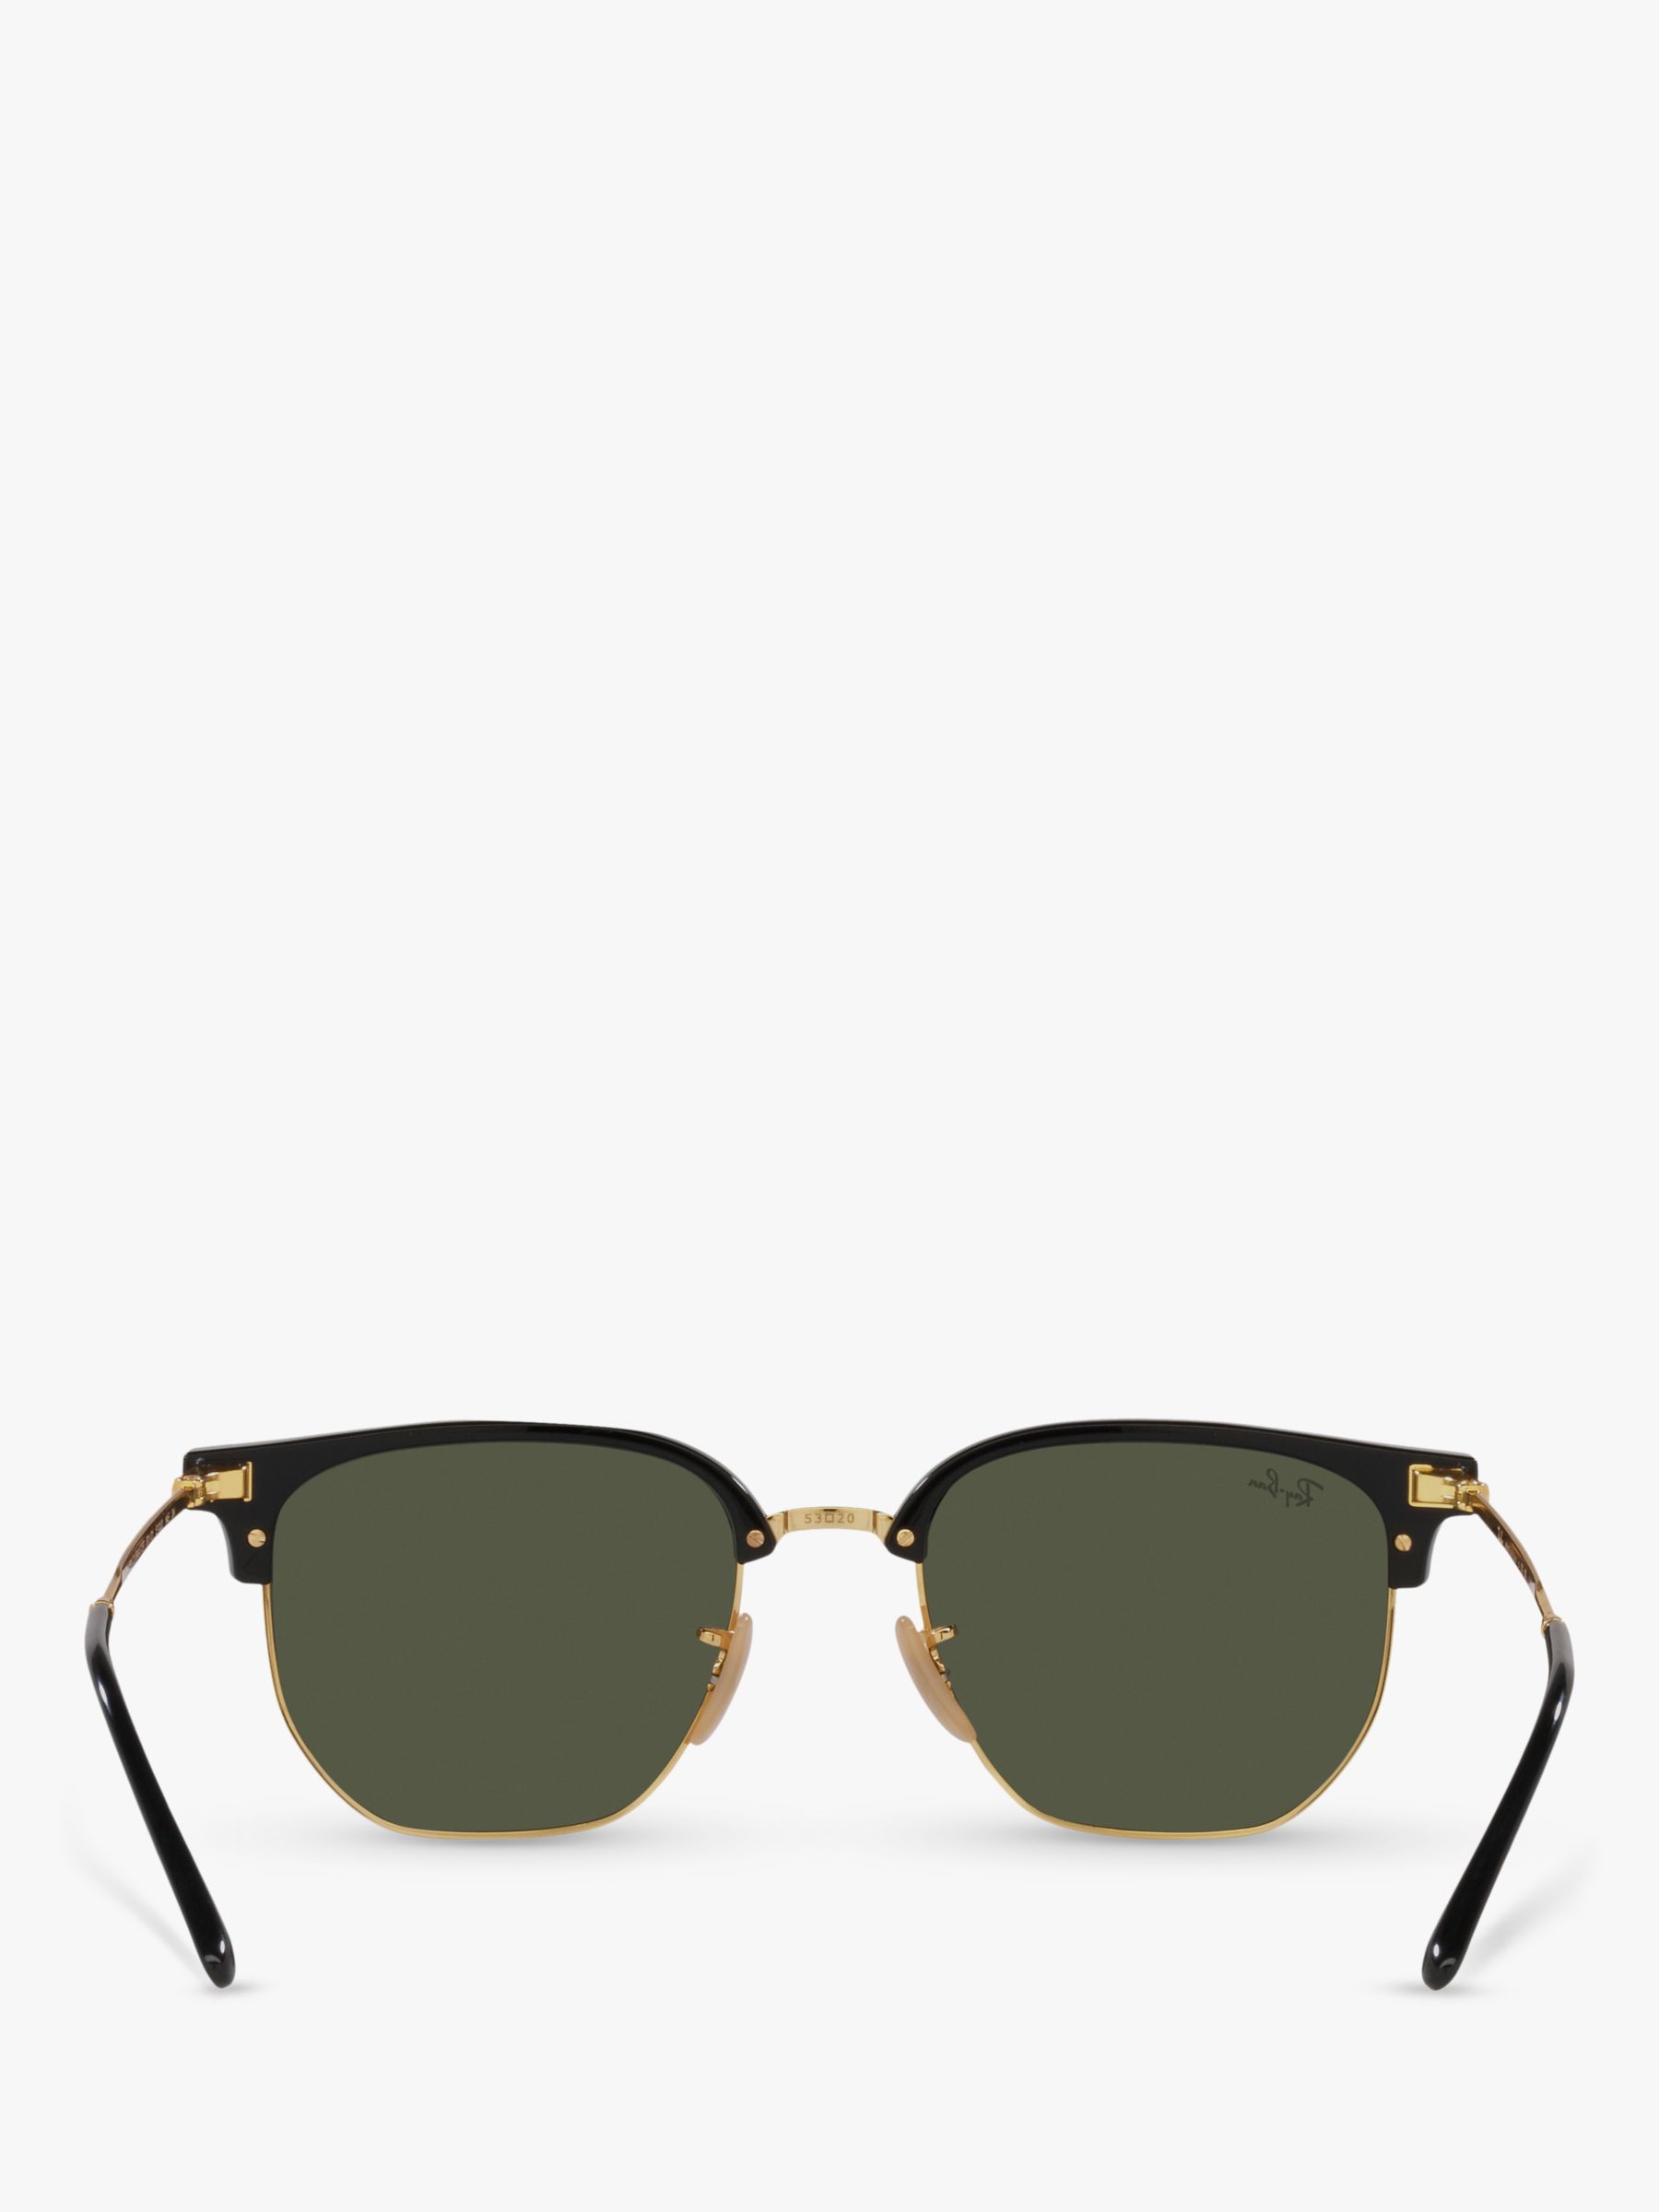 Ray-Ban RB4416 Unisex New Clubmaster Sunglasses, Black/Gold